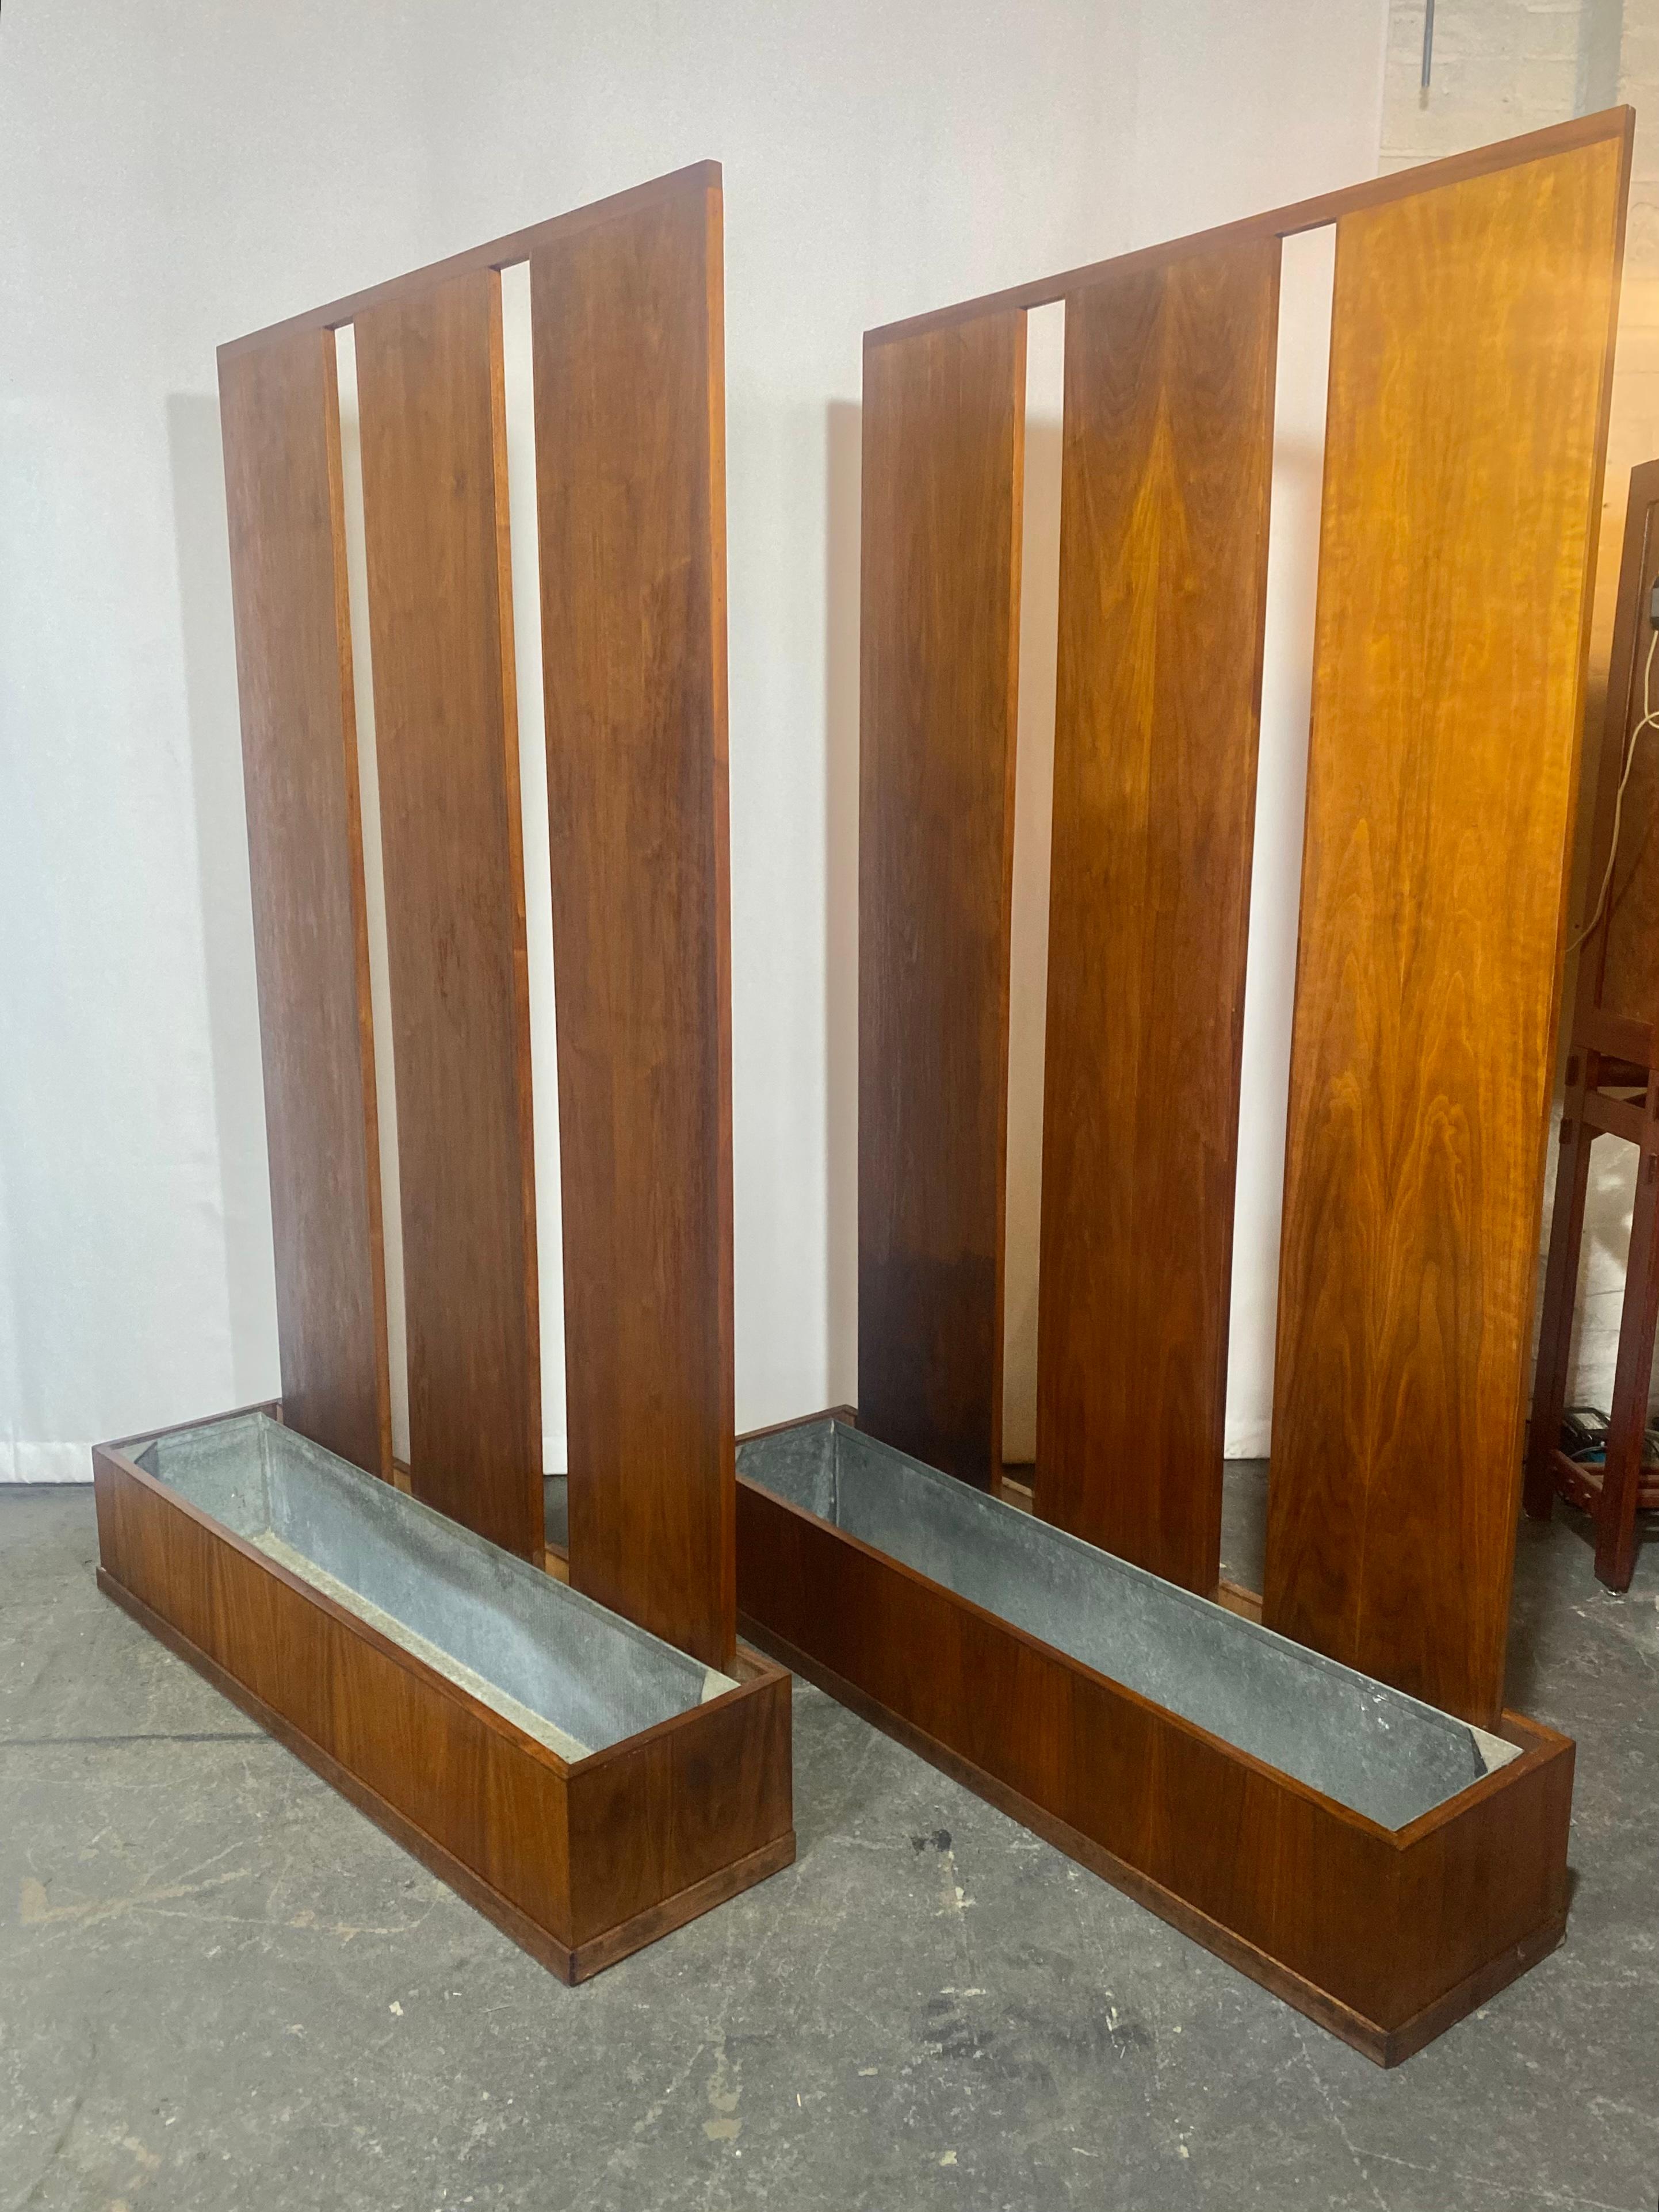 Classic Mid Century Modern Architectural Room Divider's with planter boxes.. Salvaged from an amazing Mid Century ,Classic Ranch Home in Buffalo NY.. Most likely custom built for the home, Wonderful modernist design.Retains original galvanized steel